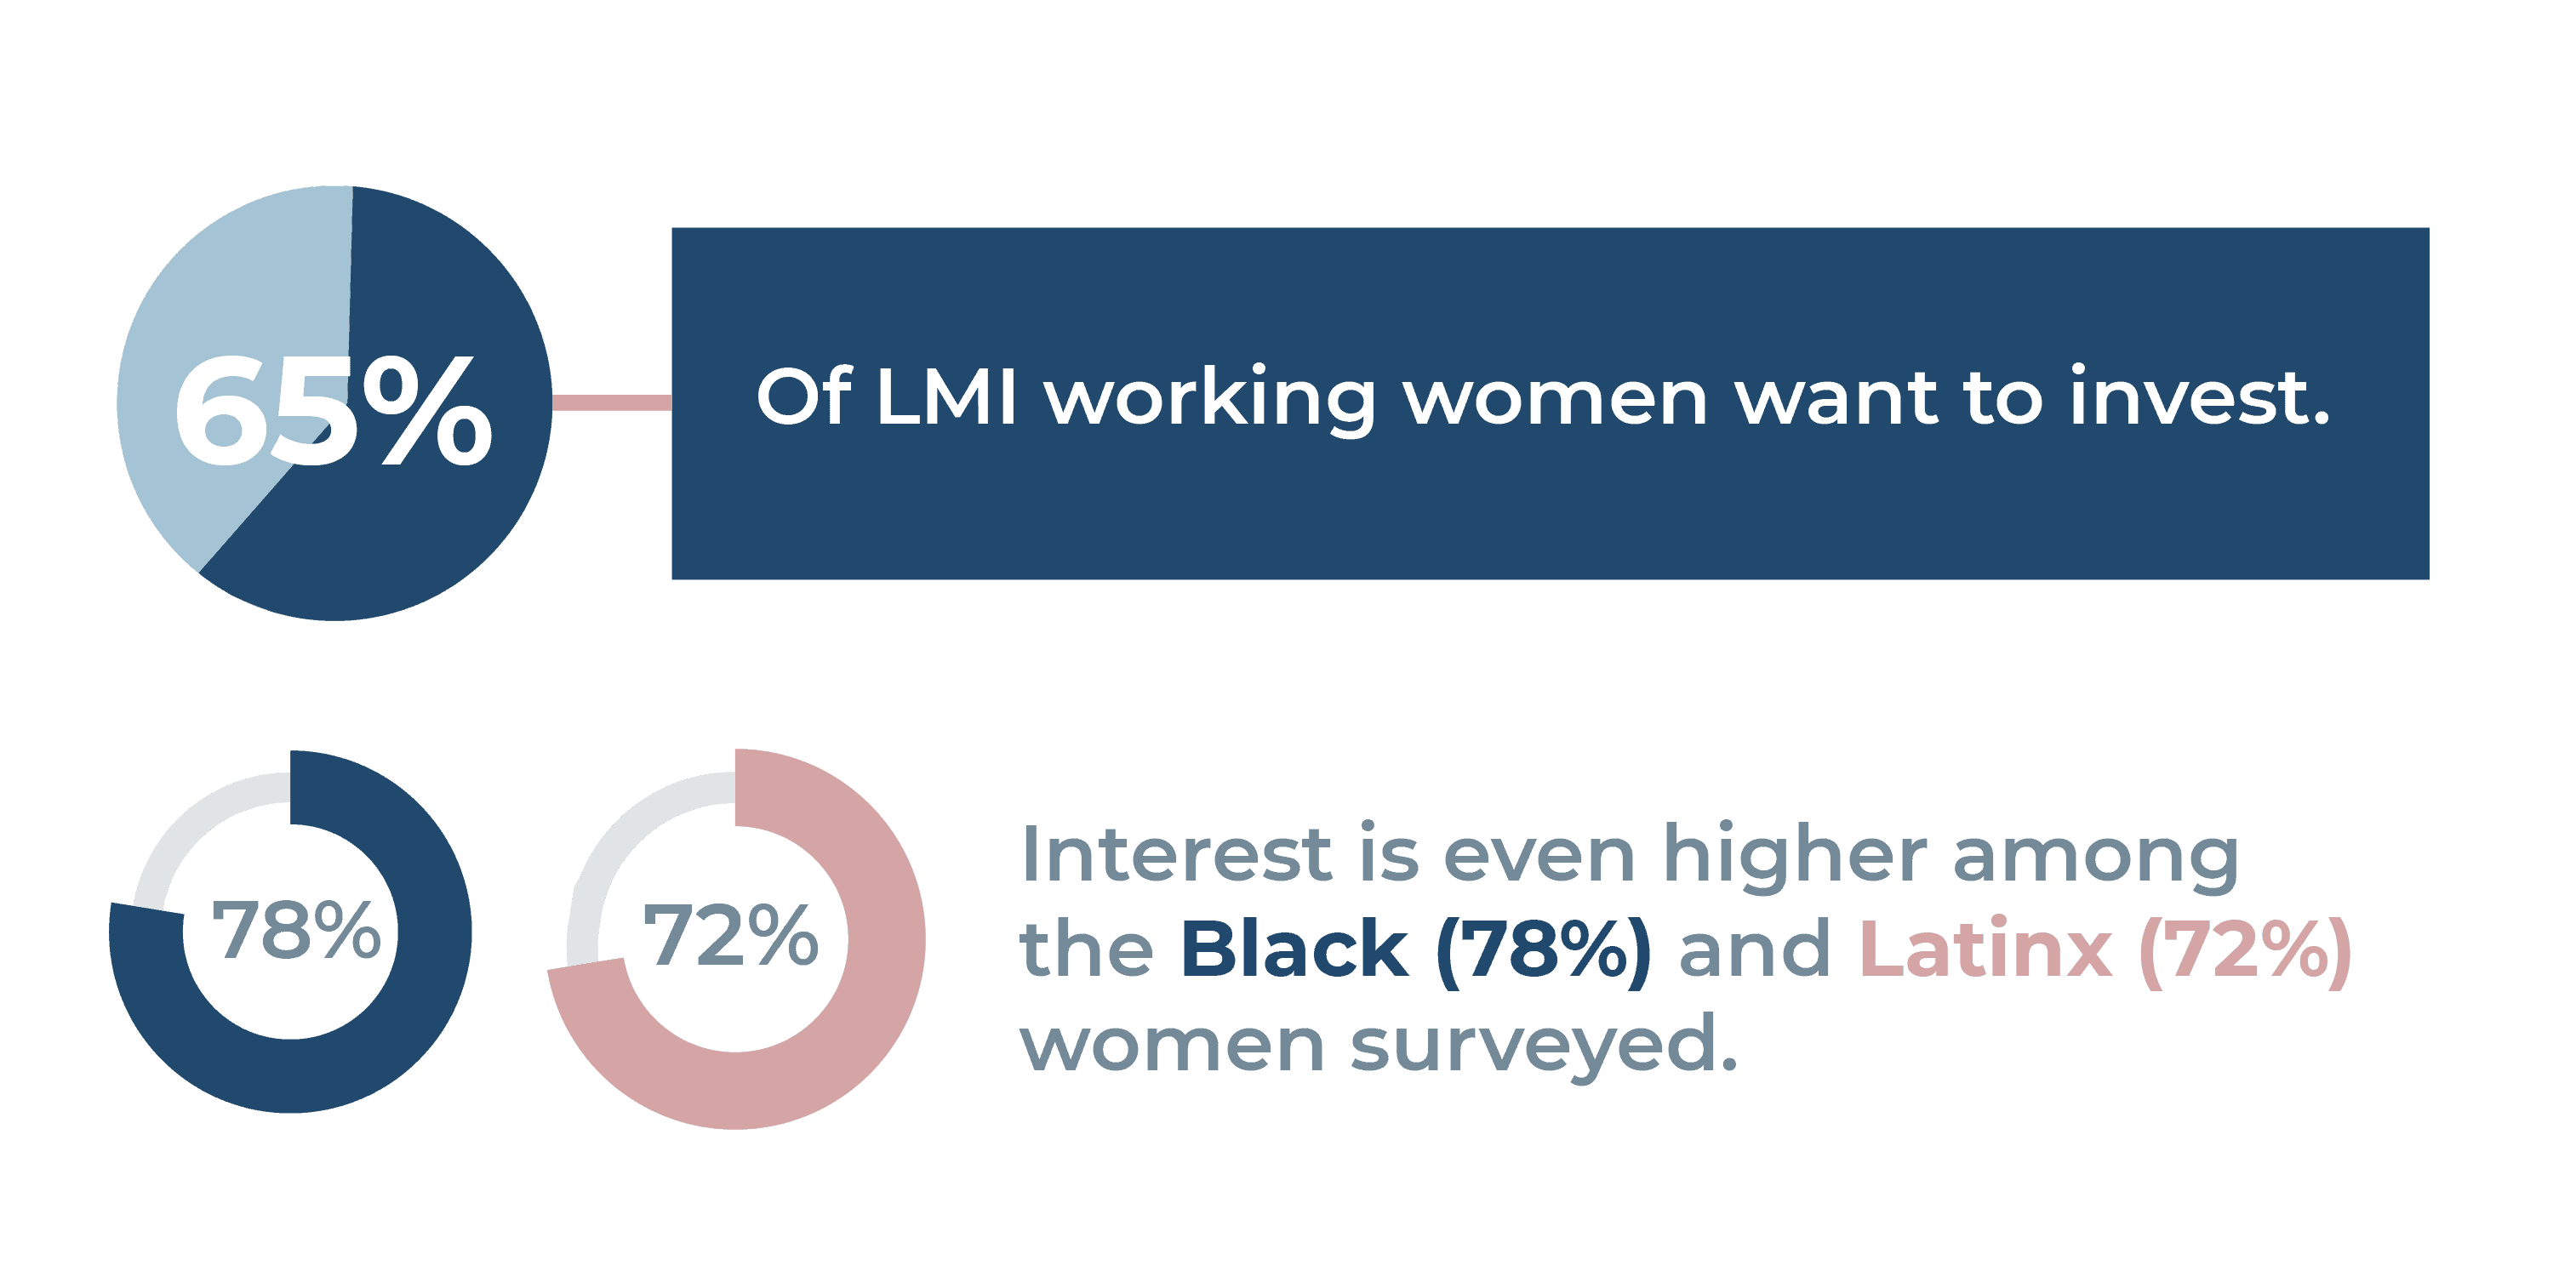 65% of LMI working women want to invest. Interest was even higher among the Black (78%) and Latinx (72%) women surveyed.